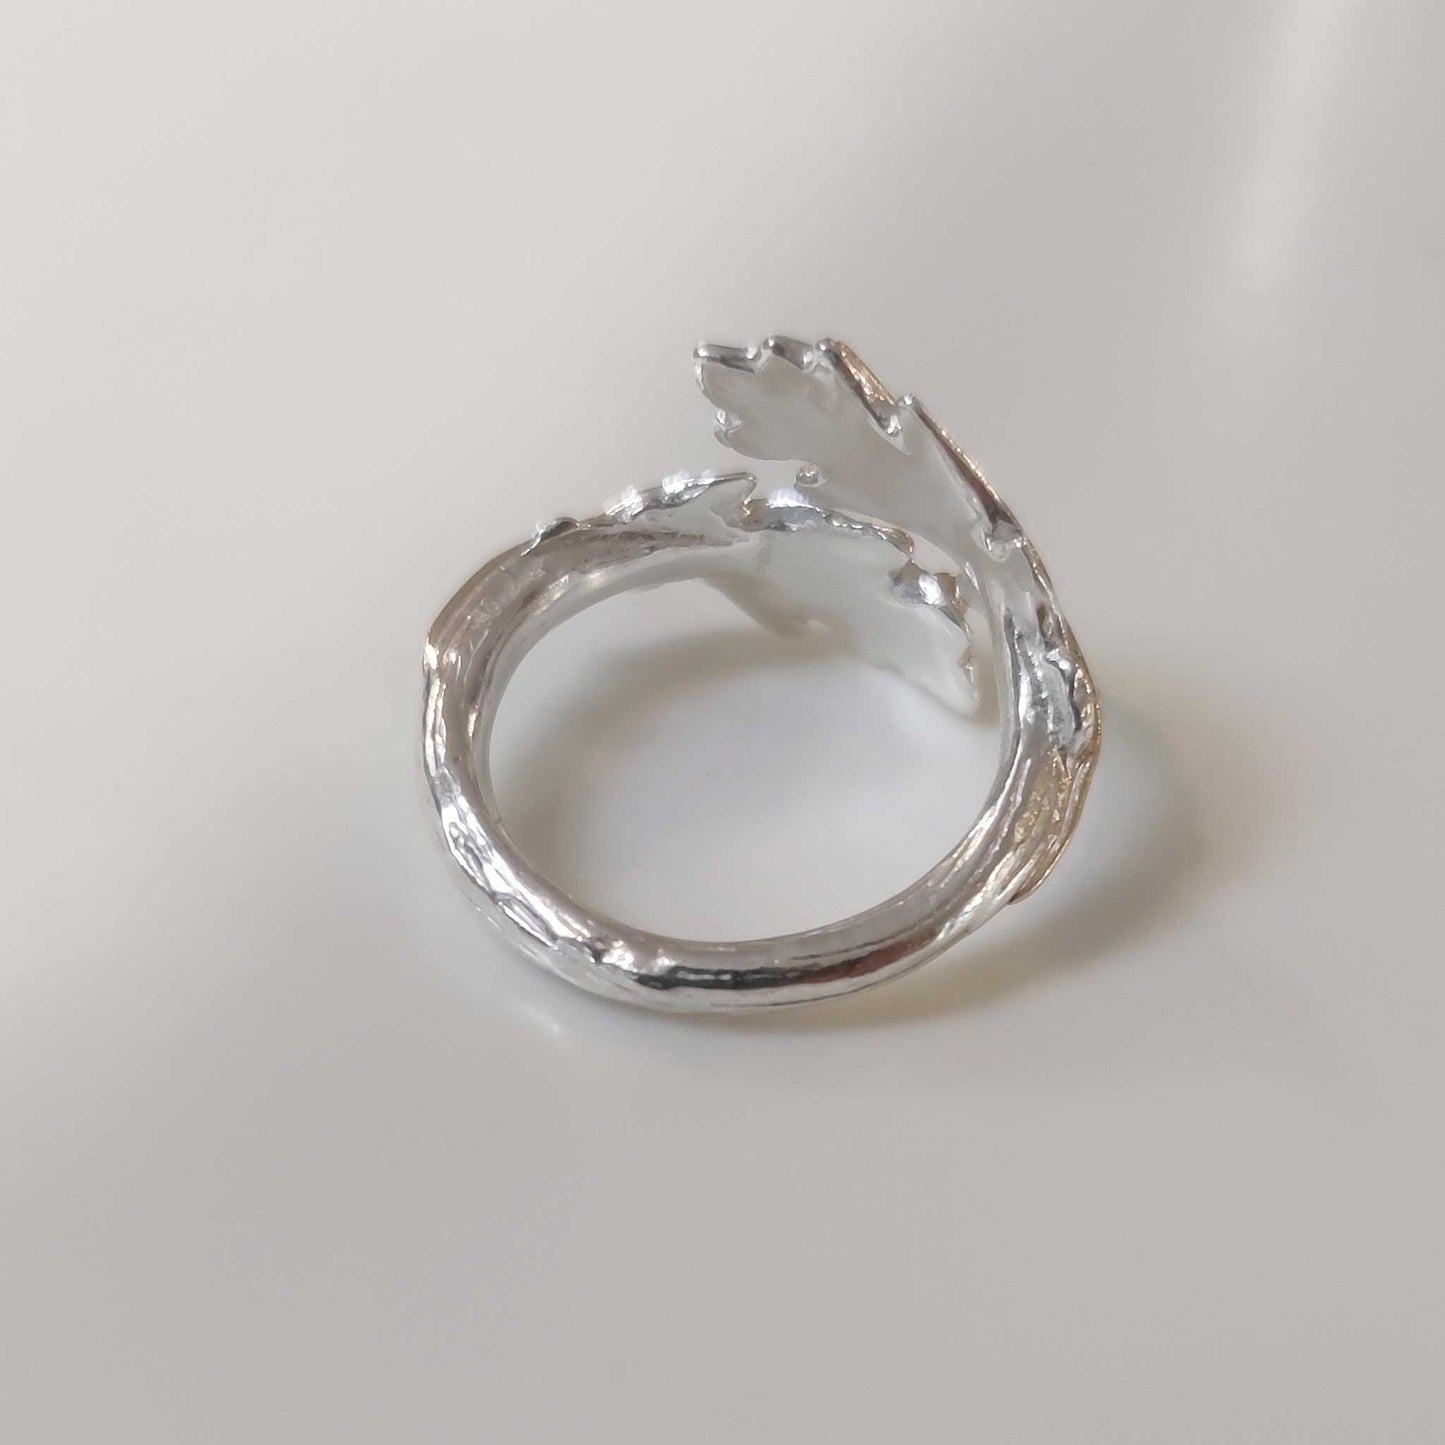 Sterling silver leaf ring by Notion Jewellery.